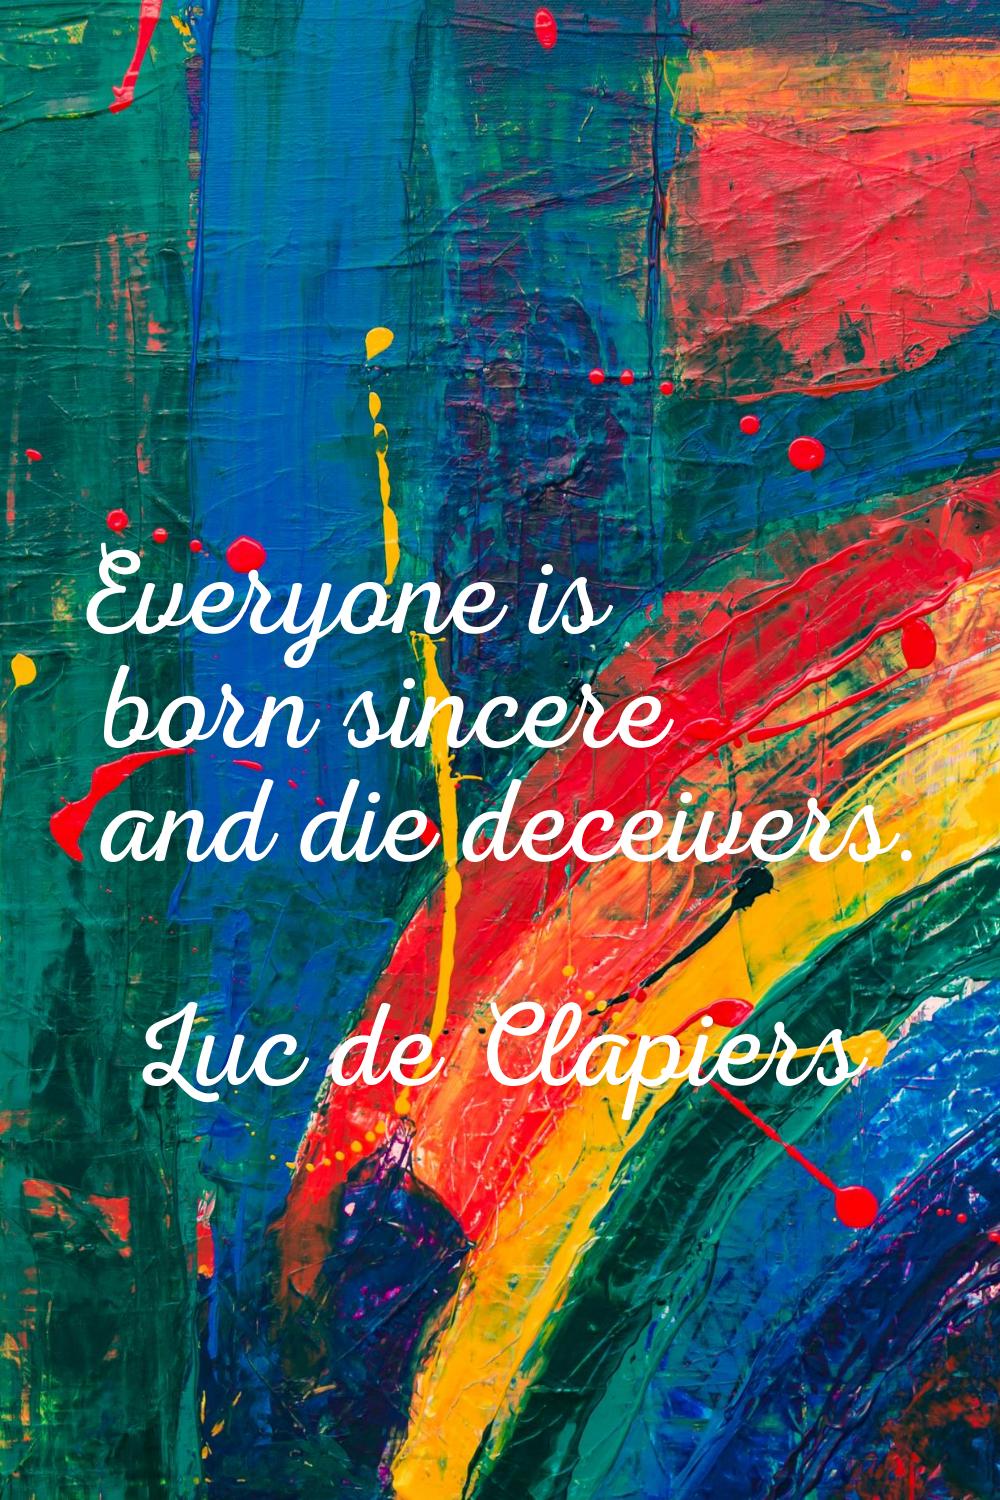 Everyone is born sincere and die deceivers.